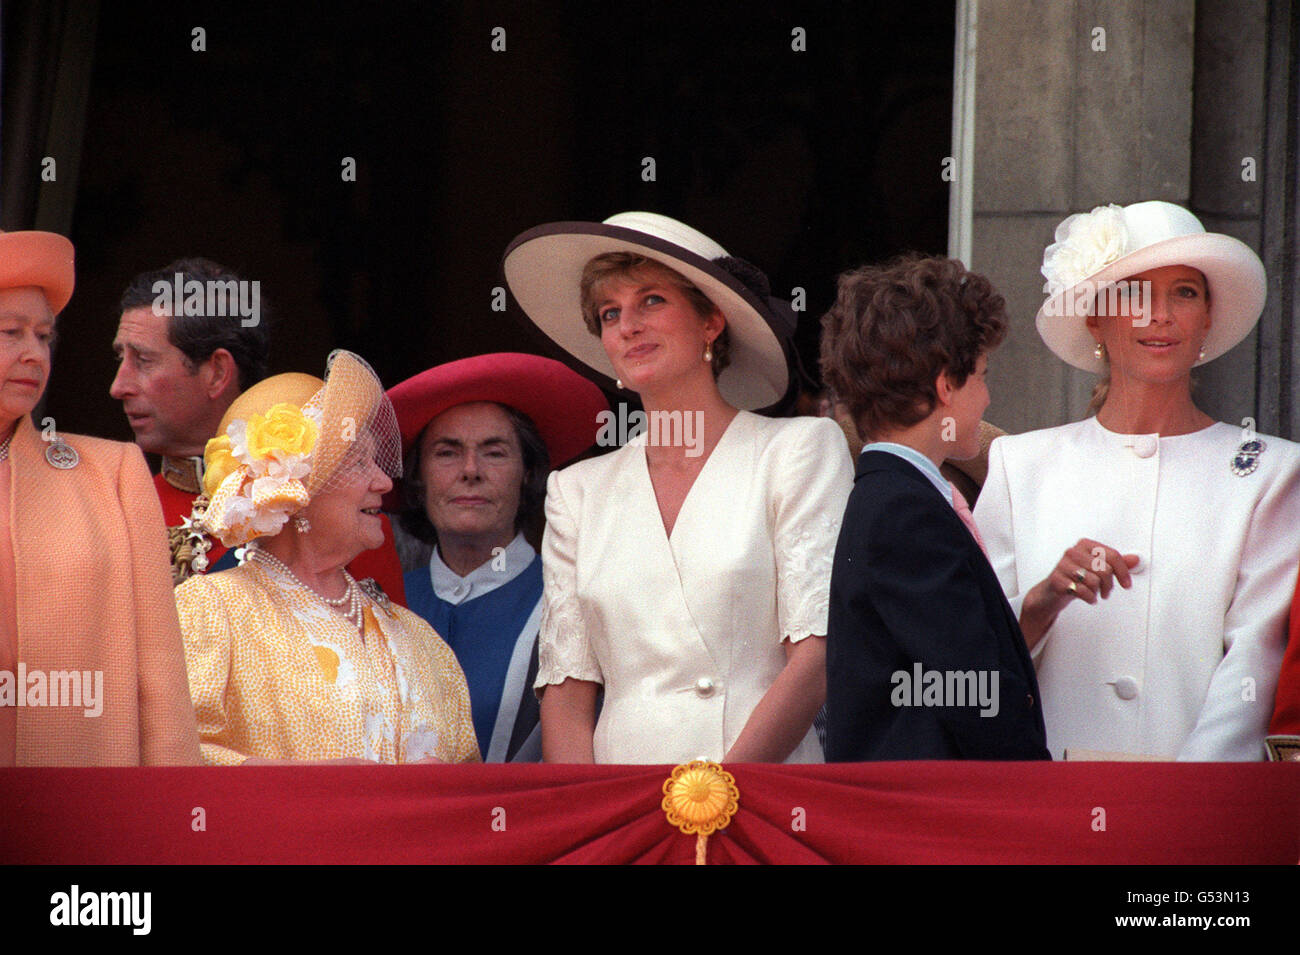 1992: The Queen Mother (3rd l) talks to the Princess of Wales on the balcony of Buckingham Palace after the Trooping the Colour ceremony in London. Also visible are (l-r) the Queen, the Prince of Wales, Lady Brabourne, Frederick Windsor and Princess Michael of Kent. Stock Photo